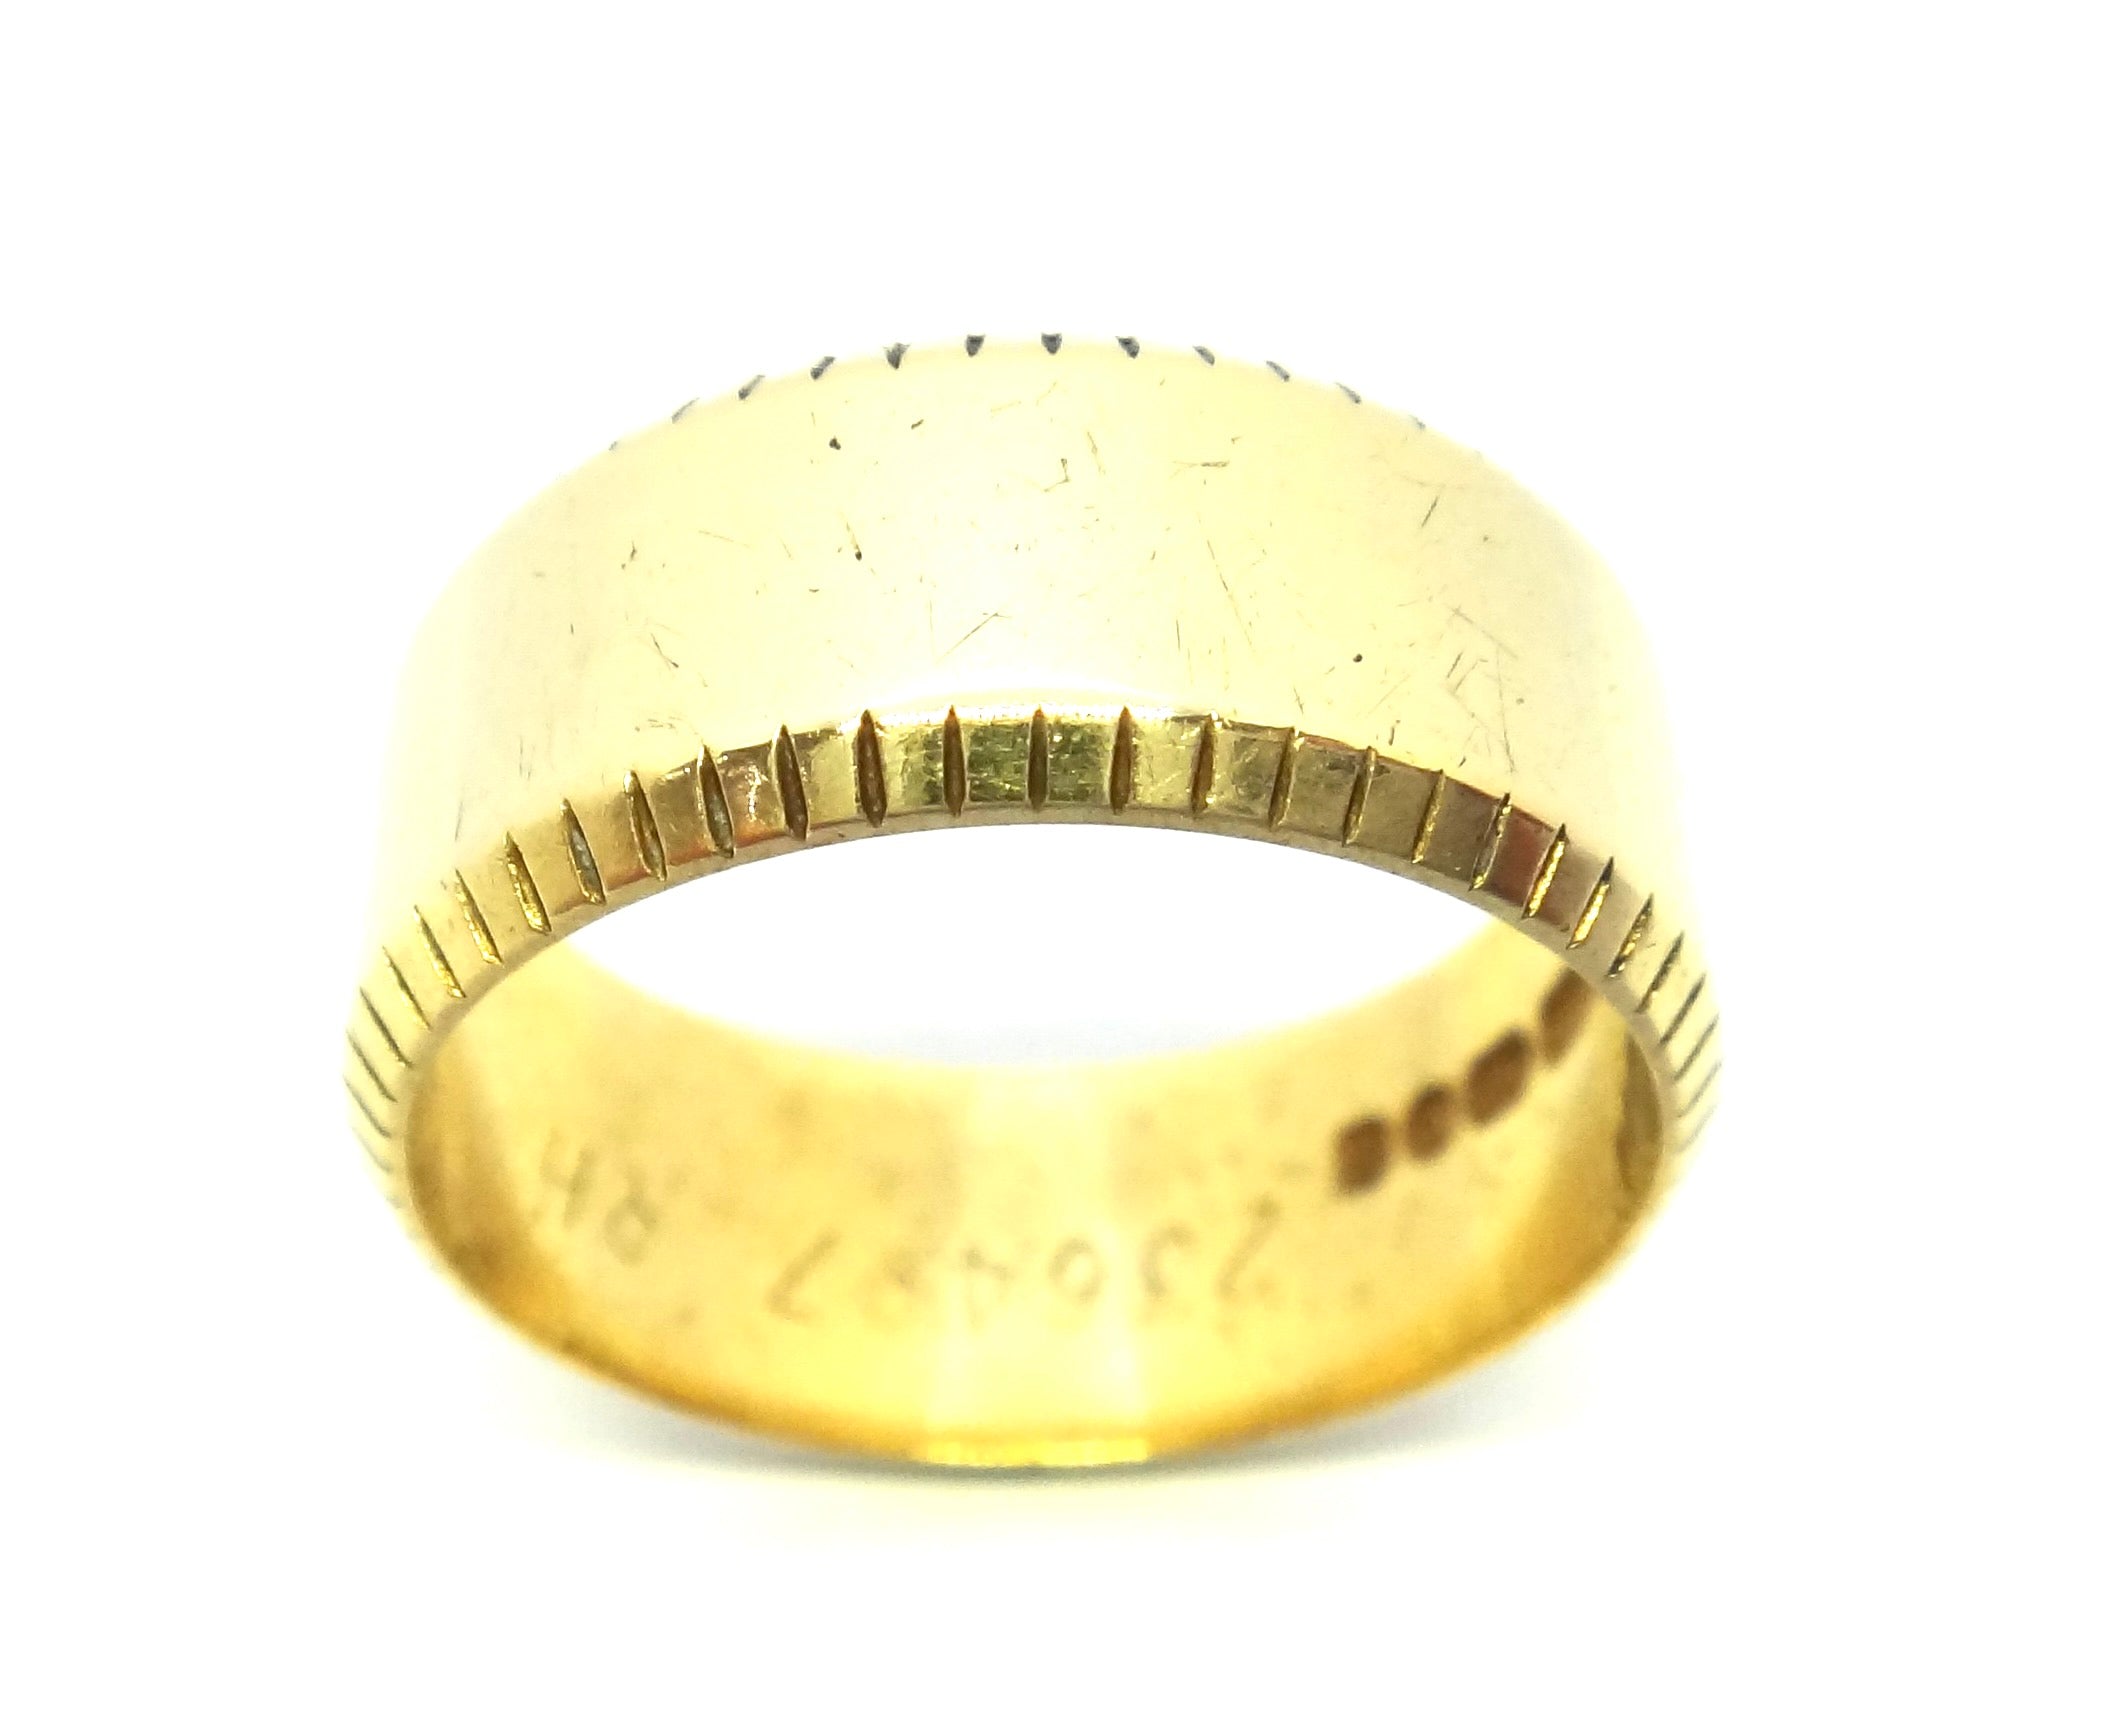 18CT Yellow GOLD Patterned Band Ring